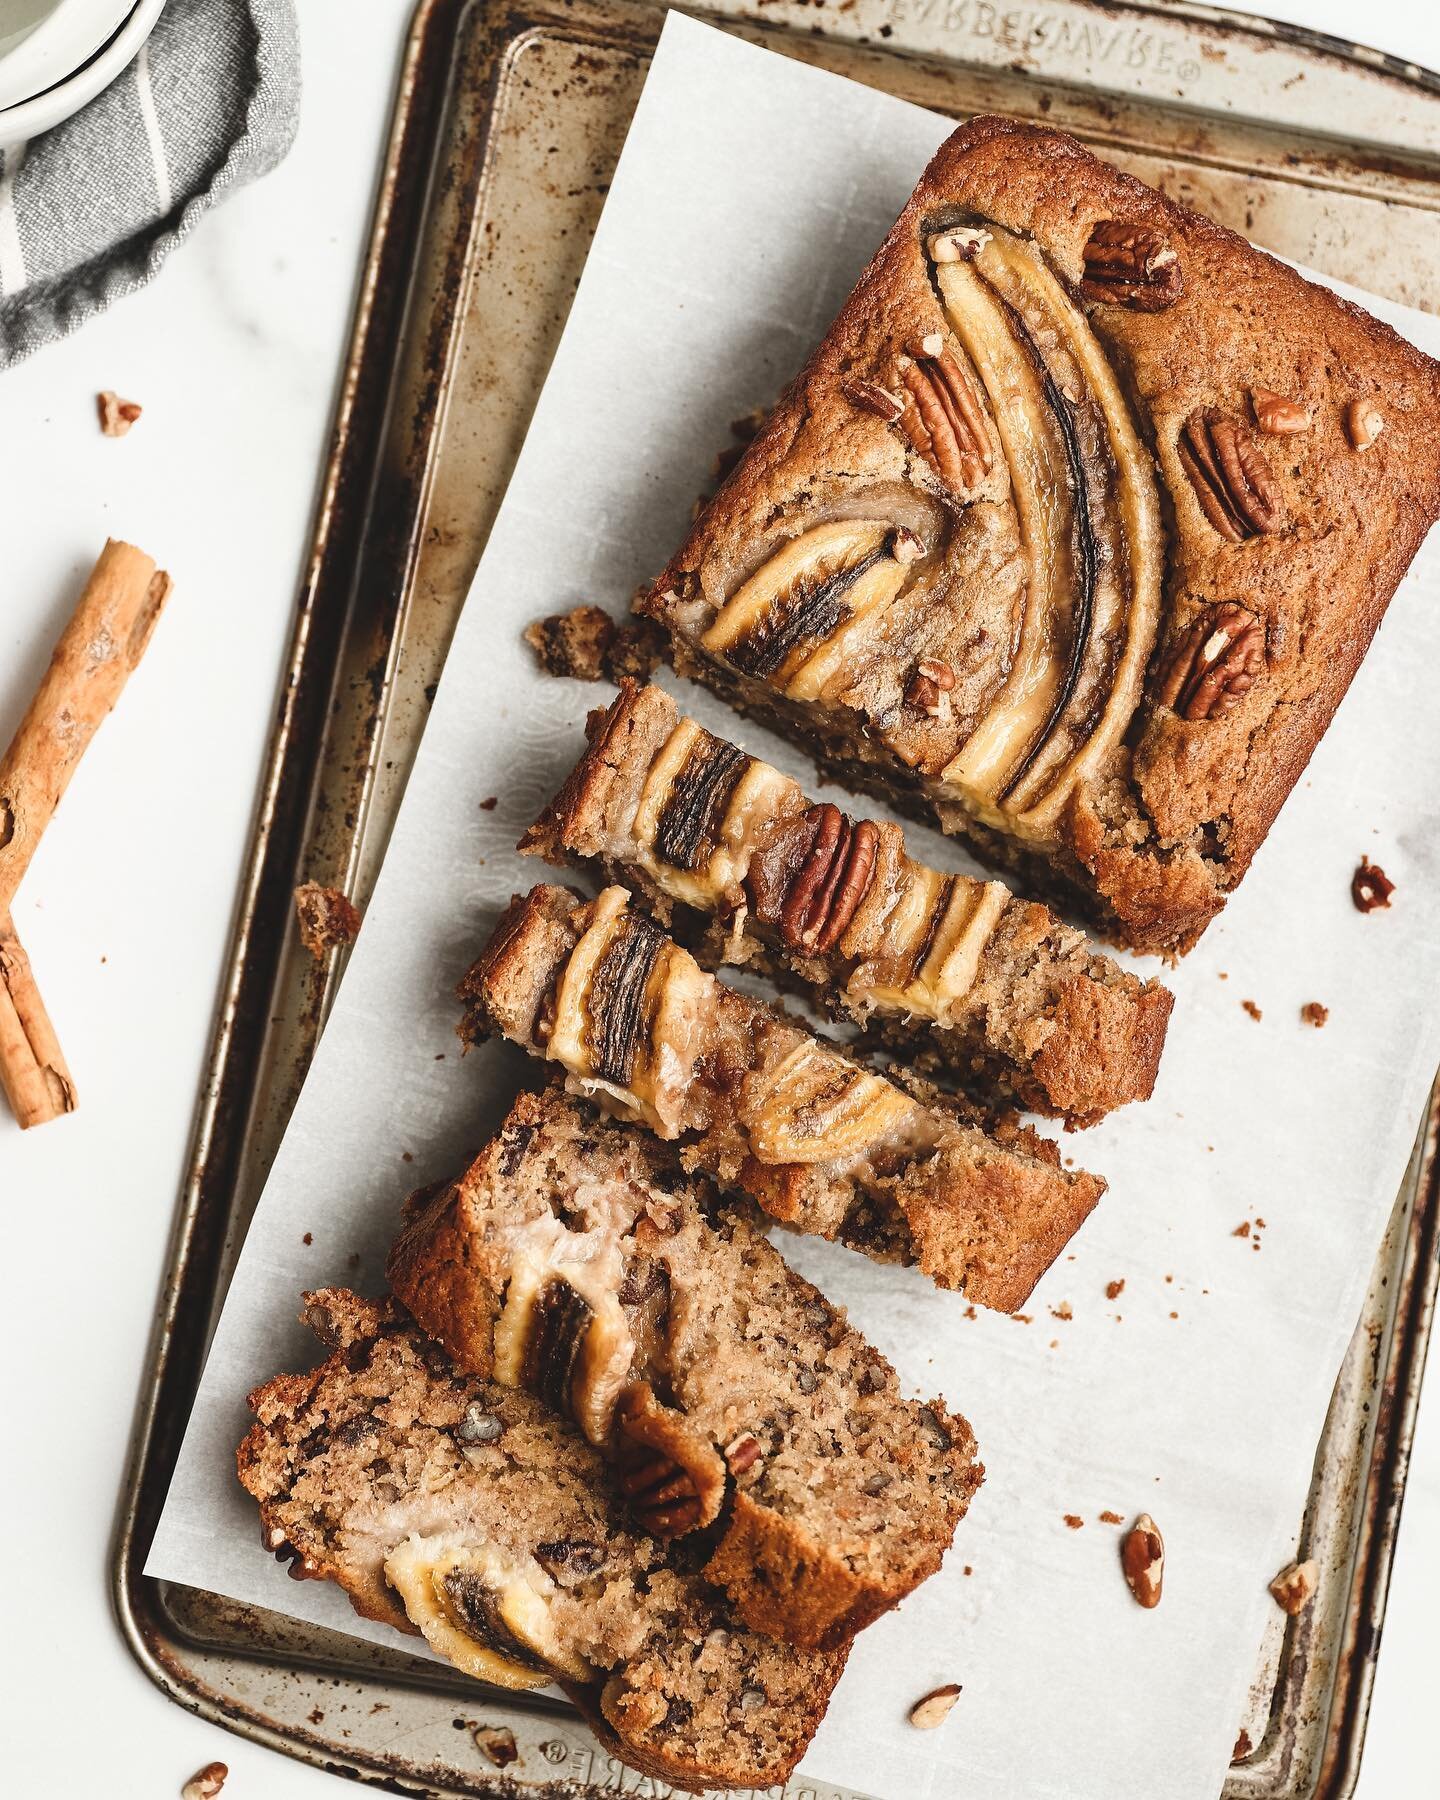 Alright you guys! Here&rsquo;s my fave banana hack in action 🍌🍌🍌

✨Added Sugar-Free &amp; Whole Grain Banana Cake✨

Now there&rsquo;s nothing wrong with some regular banana cake, but sometimes you just want a little healthier option... to devour o